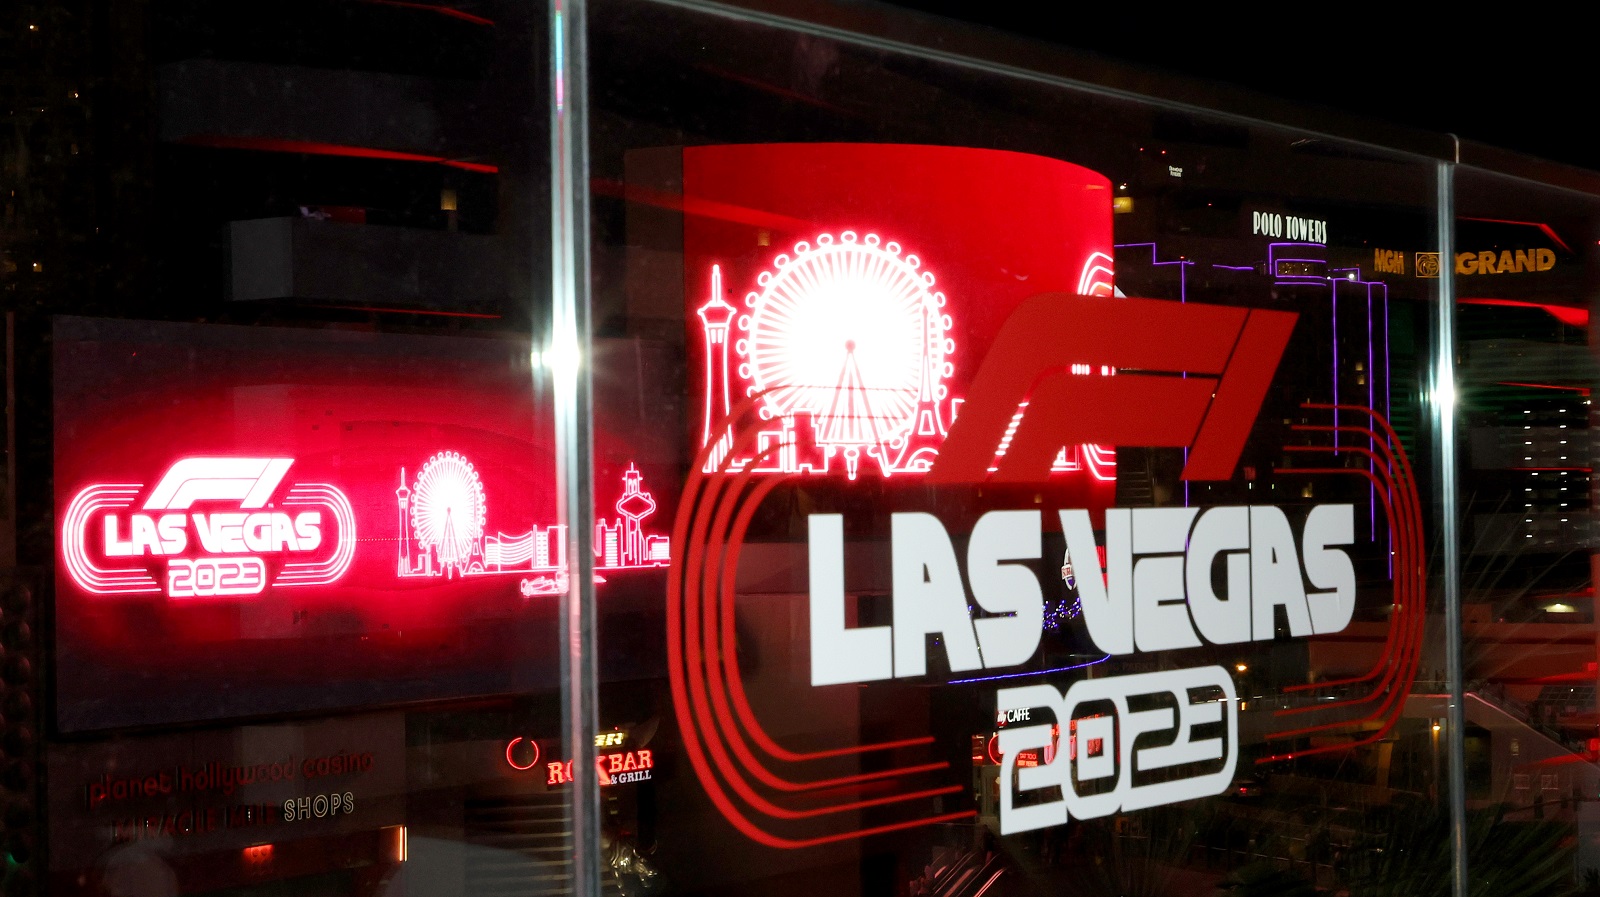 A decal of the Formula 1 Las Vegas Race 2023 is shown with digital signs on the Las Vegas Strip displaying the race logo during the announcement on March 30, 2022. | Ethan Miller / Formula 1 via Getty Images